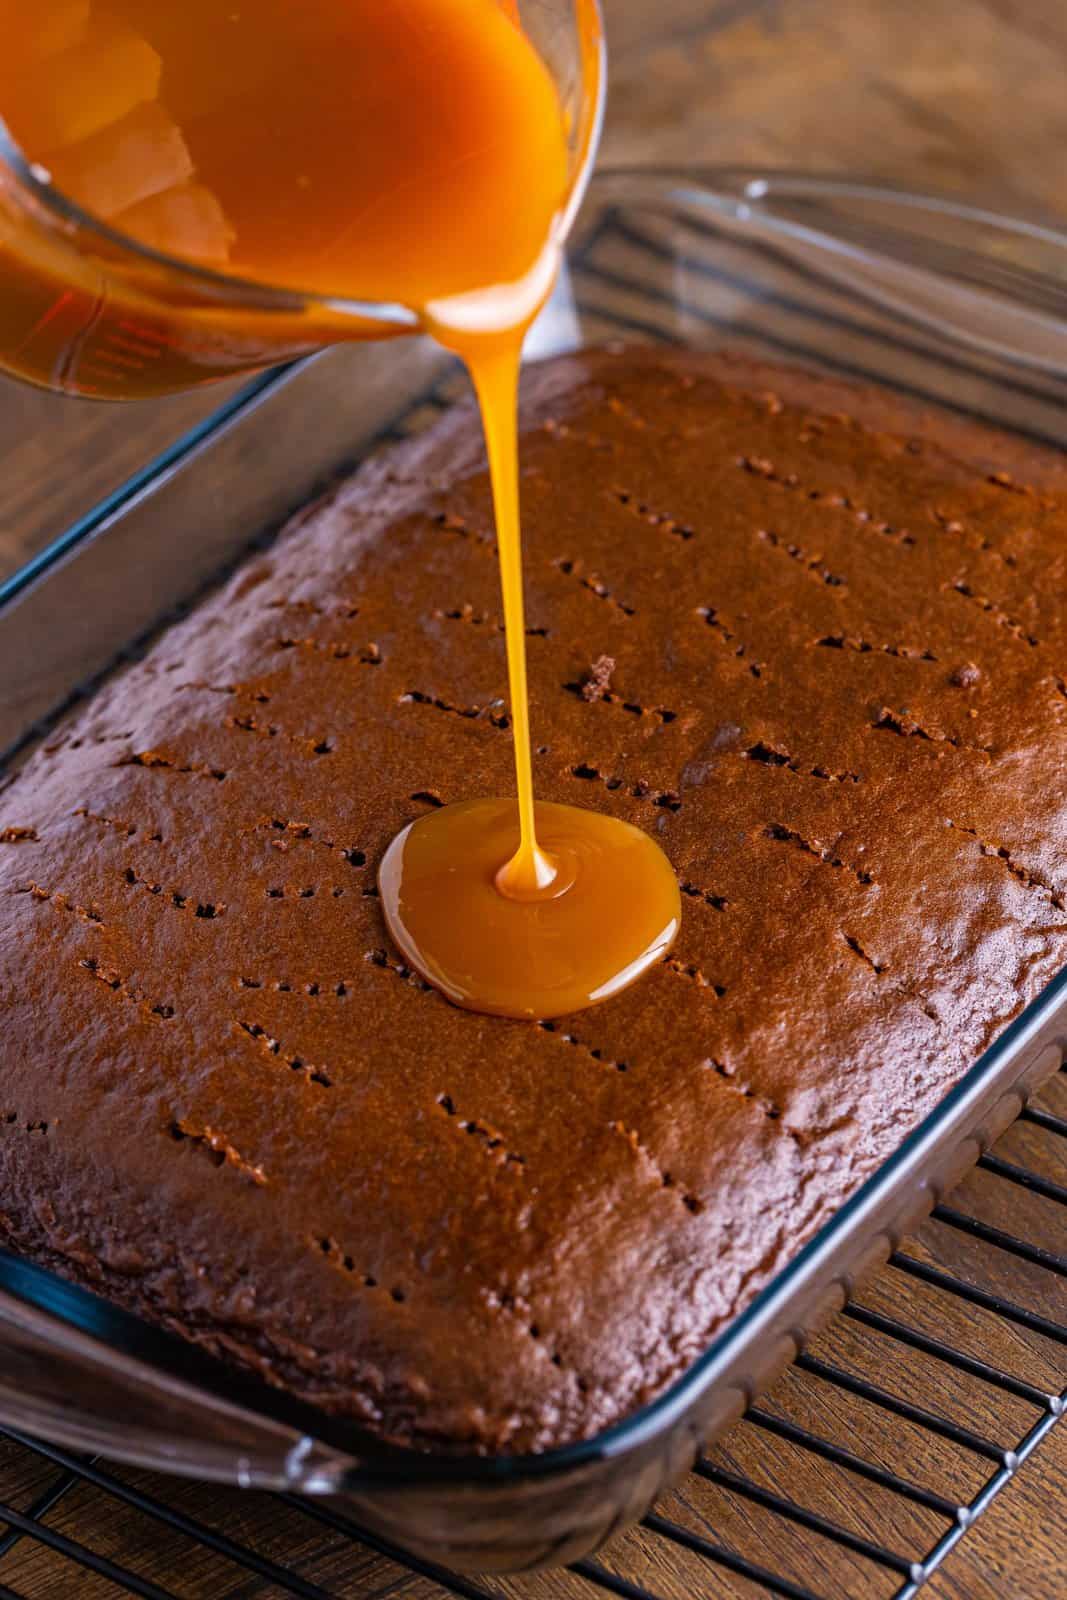 Caramel topping being poured on a chocolate cake with fork holes.